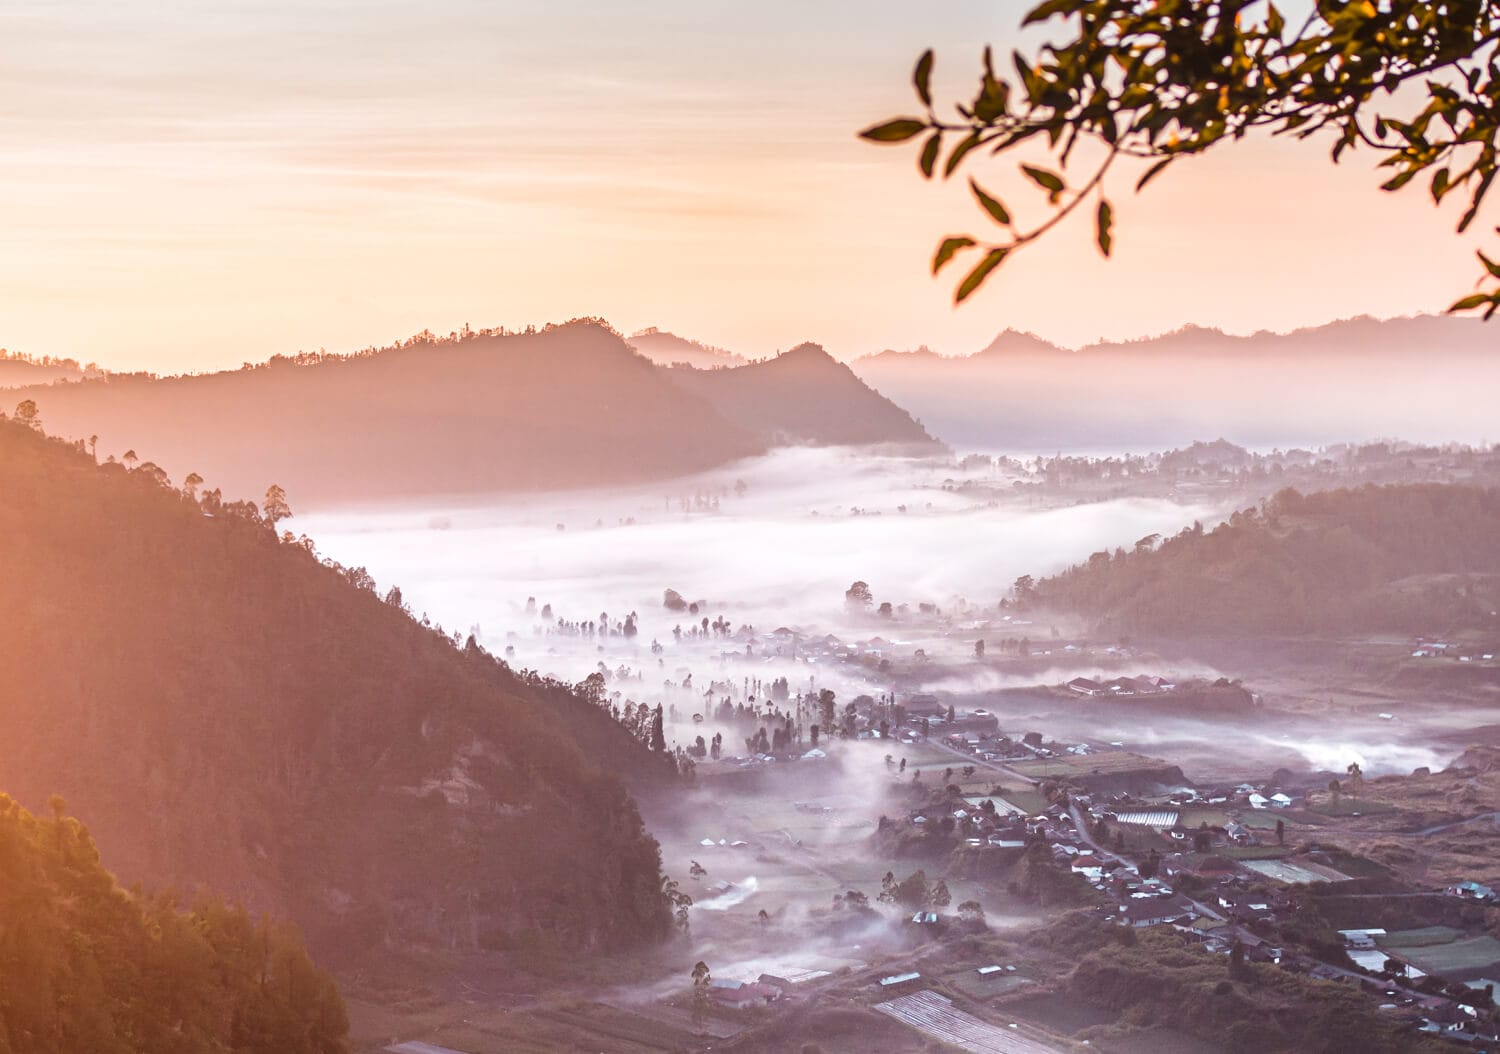 View over Pinggan Village covered by white fog at sunrise in North Bali during the rainy season.